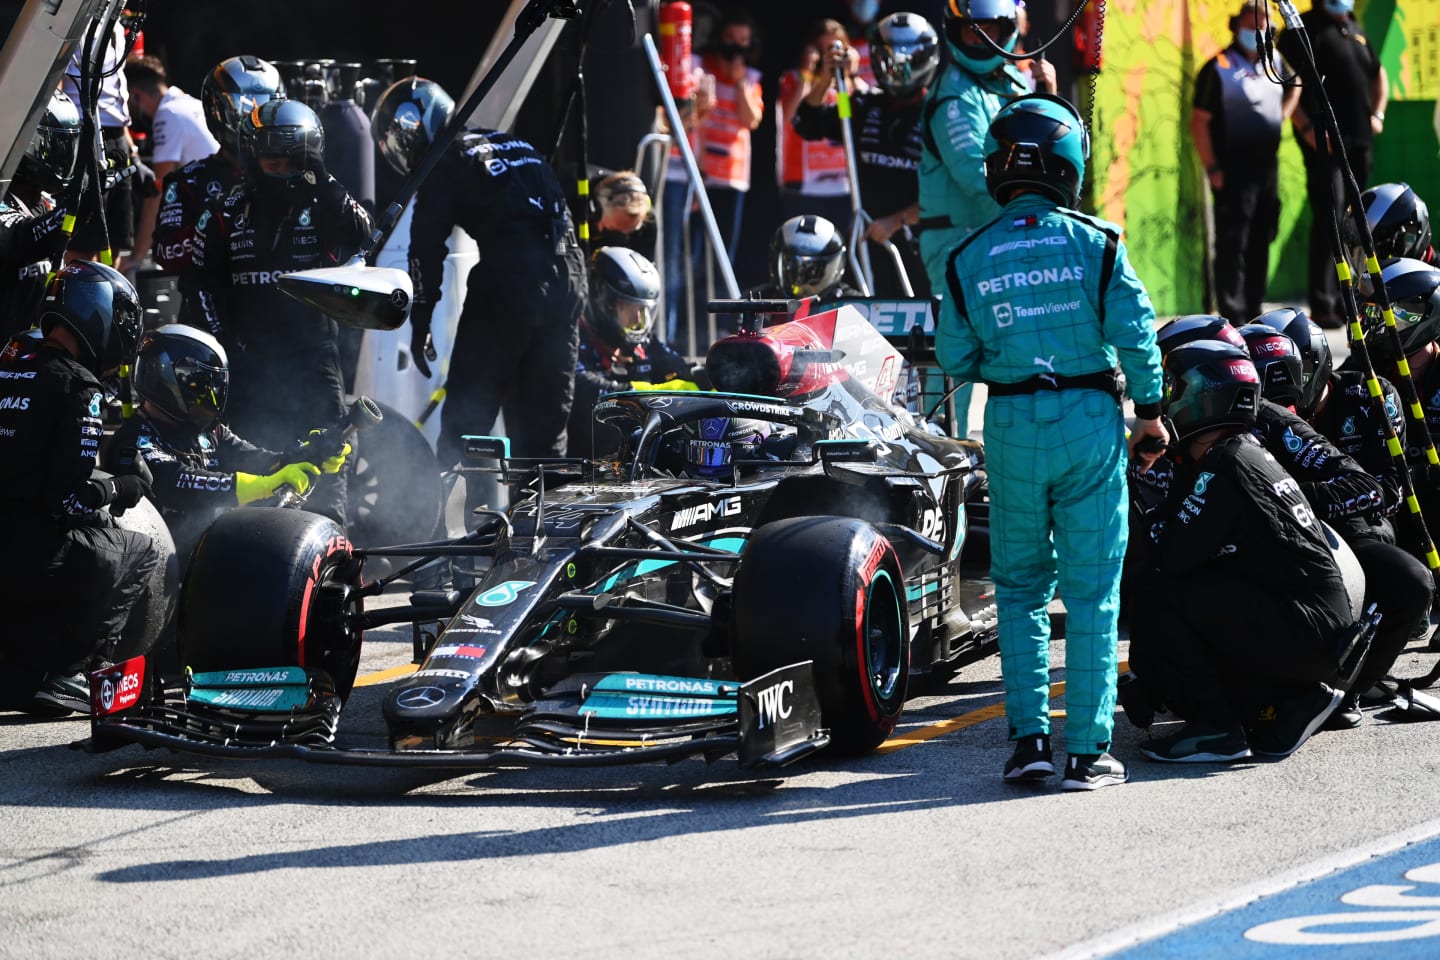 ZANDVOORT, NETHERLANDS - SEPTEMBER 05: Lewis Hamilton of Great Britain driving the (44) Mercedes AMG Petronas F1 Team Mercedes W12 makes a pitstop during the F1 Grand Prix of The Netherlands at Circuit Zandvoort on September 05, 2021 in Zandvoort, Netherlands. (Photo by Dan Mullan/Getty Images)